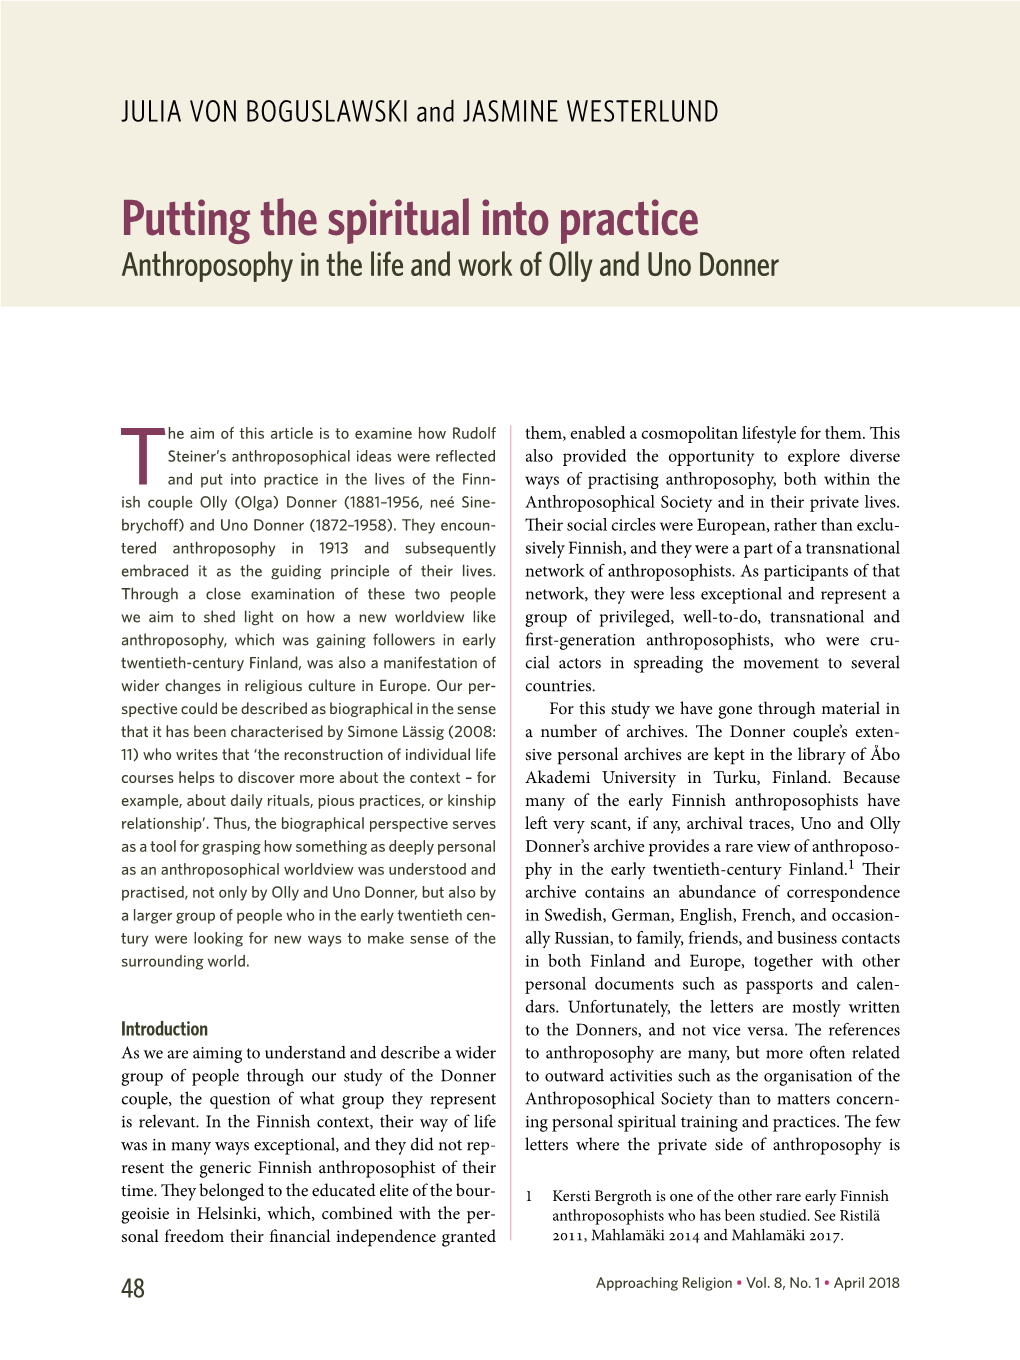 Putting the Spiritual Into Practice Anthroposophy in the Life and Work of Olly and Uno Donner